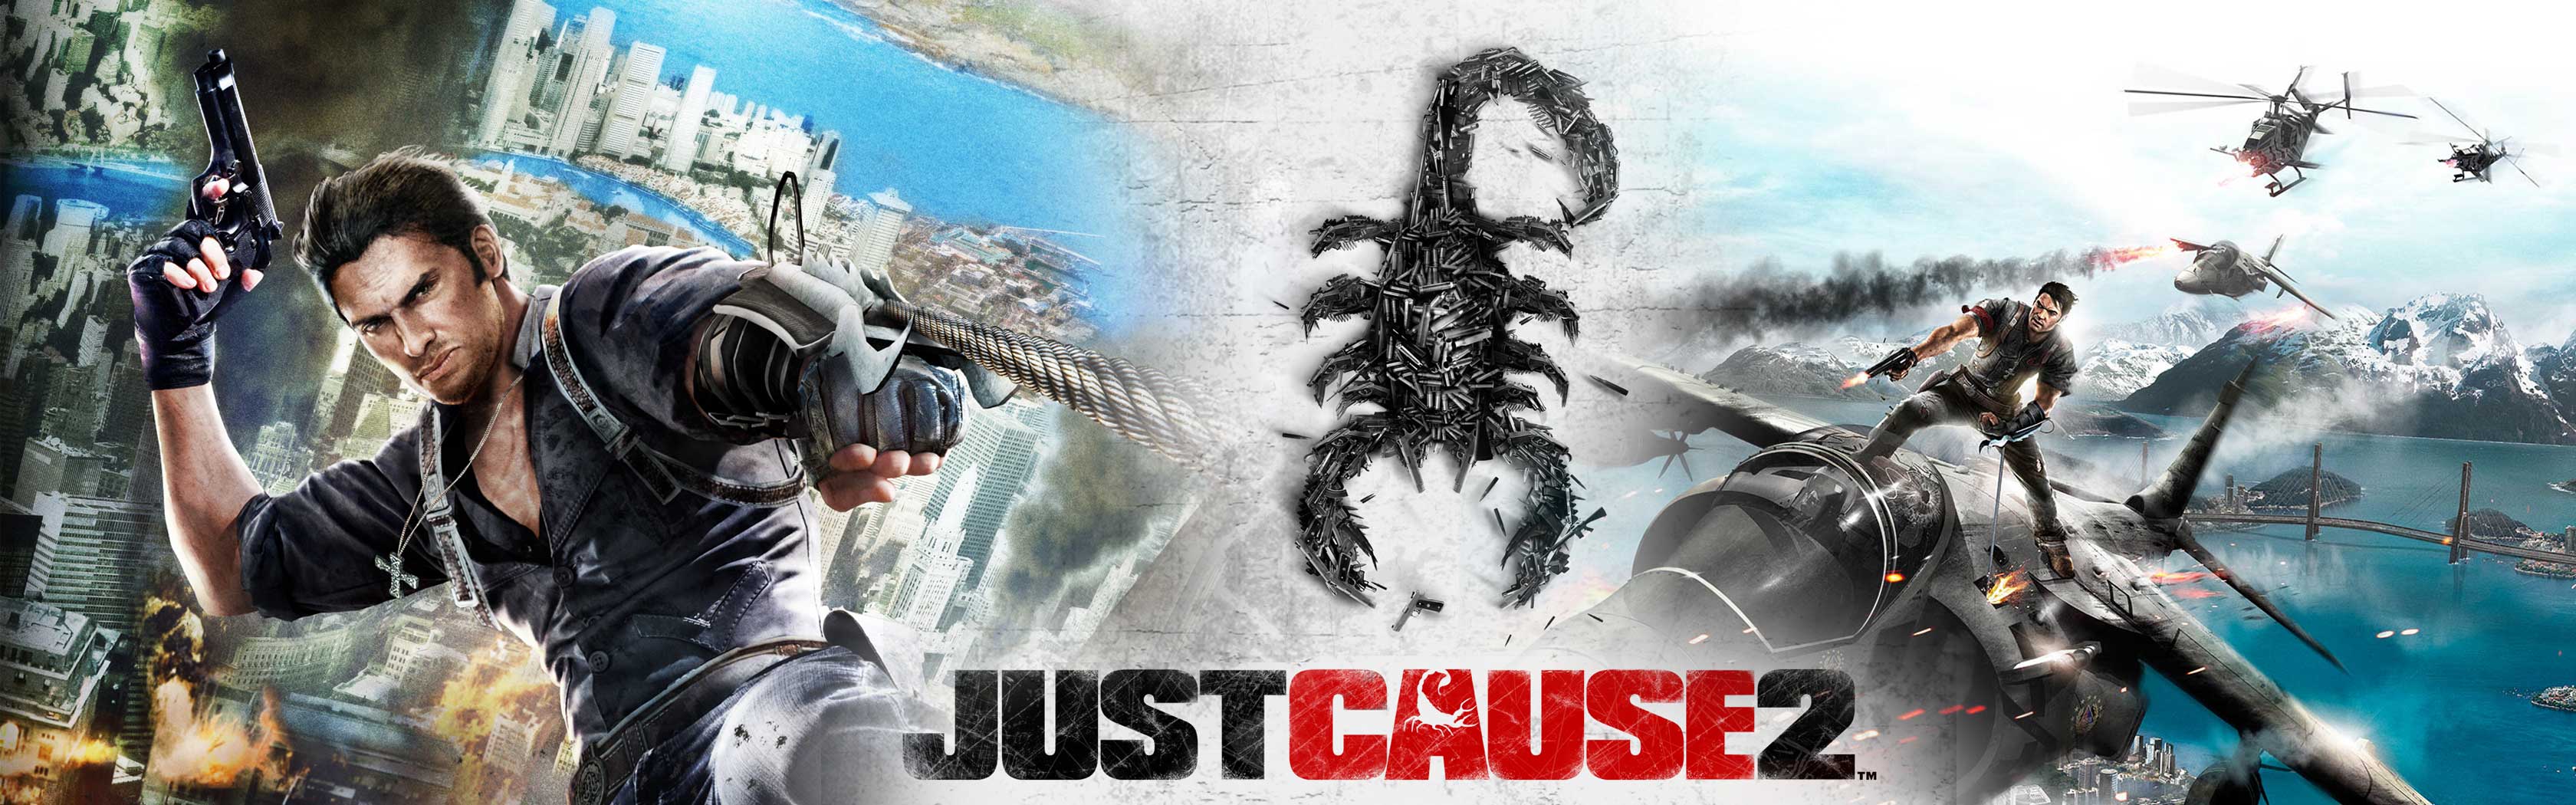 Video Game Just Cause 2 3360x1050